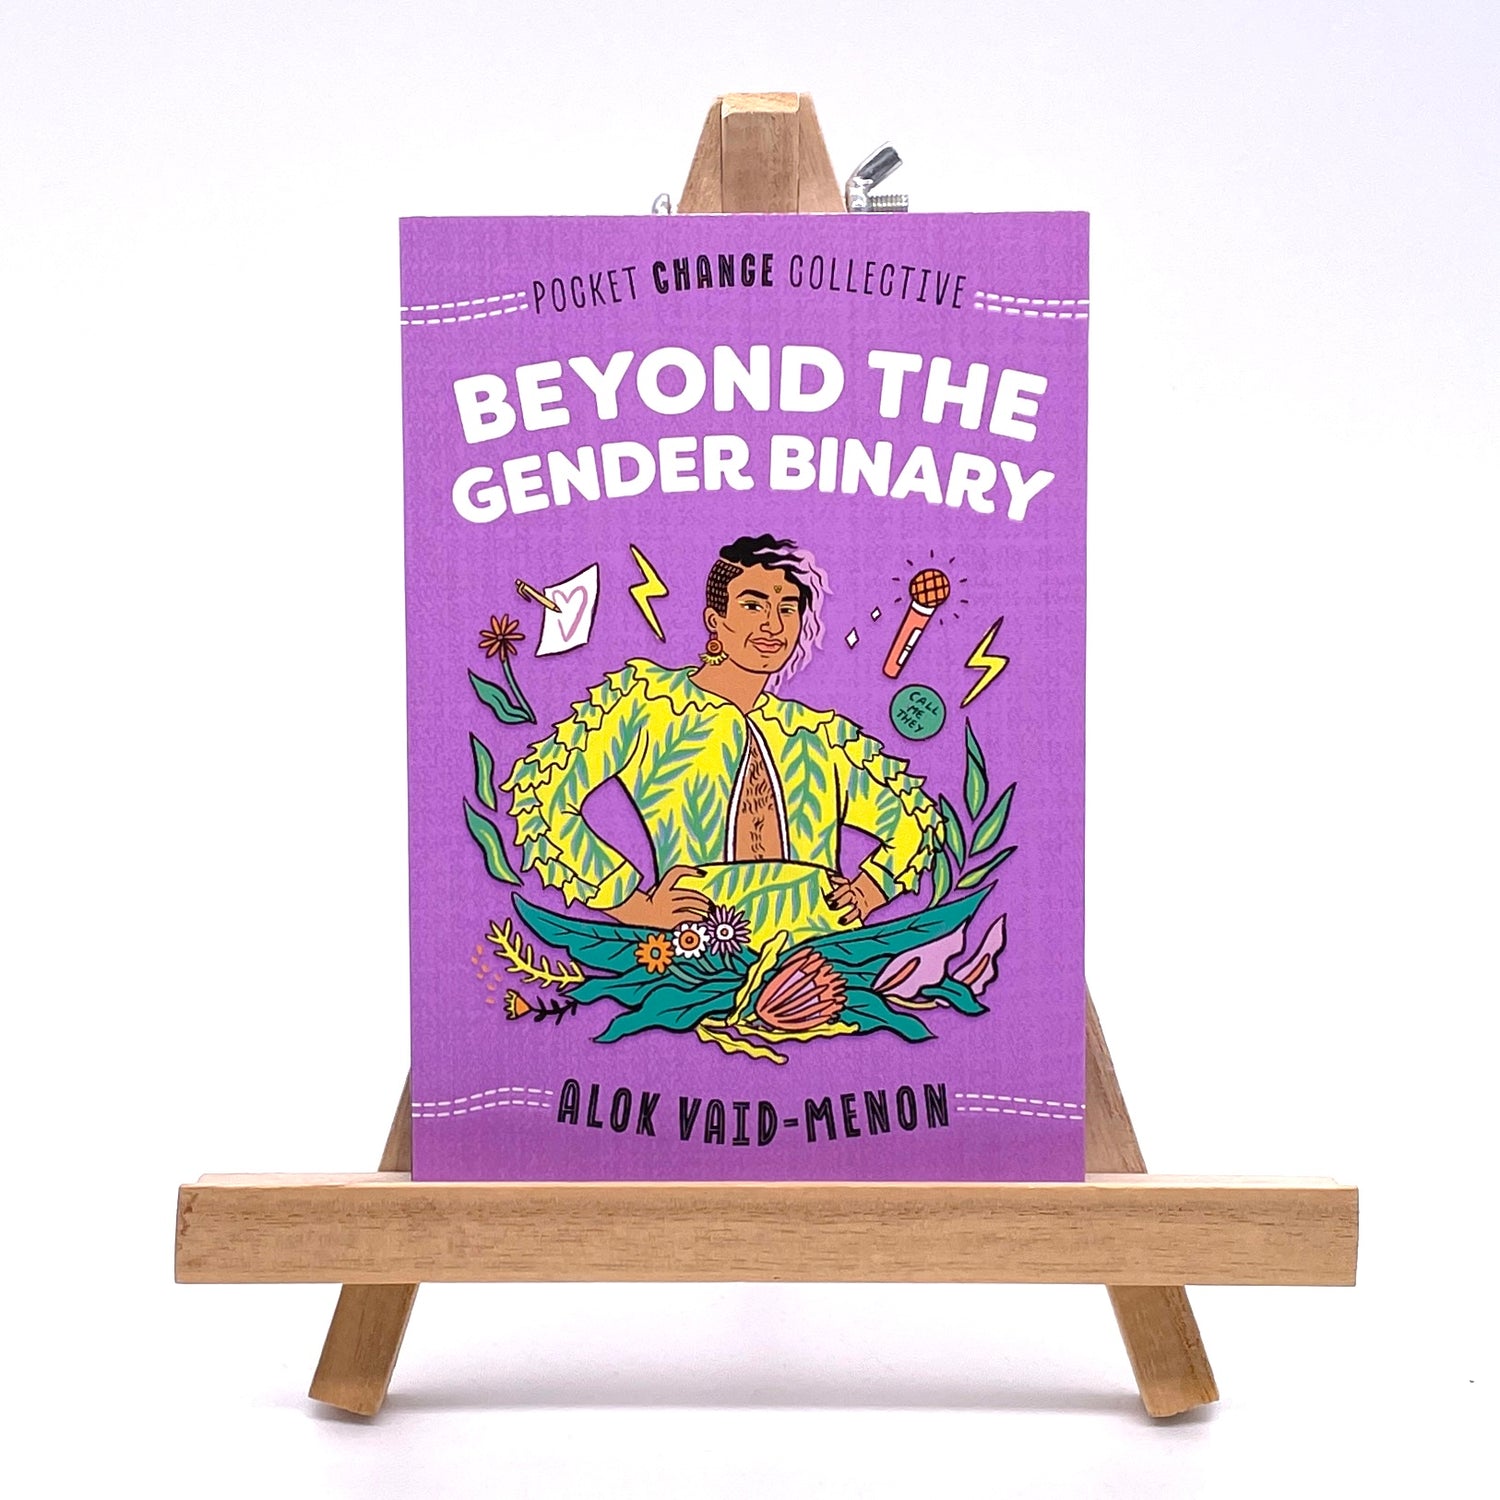 Cover of Beyond the Gender Binary by Alok Vaid-Menon, showing the author, a non-binary person surrounded by plants.